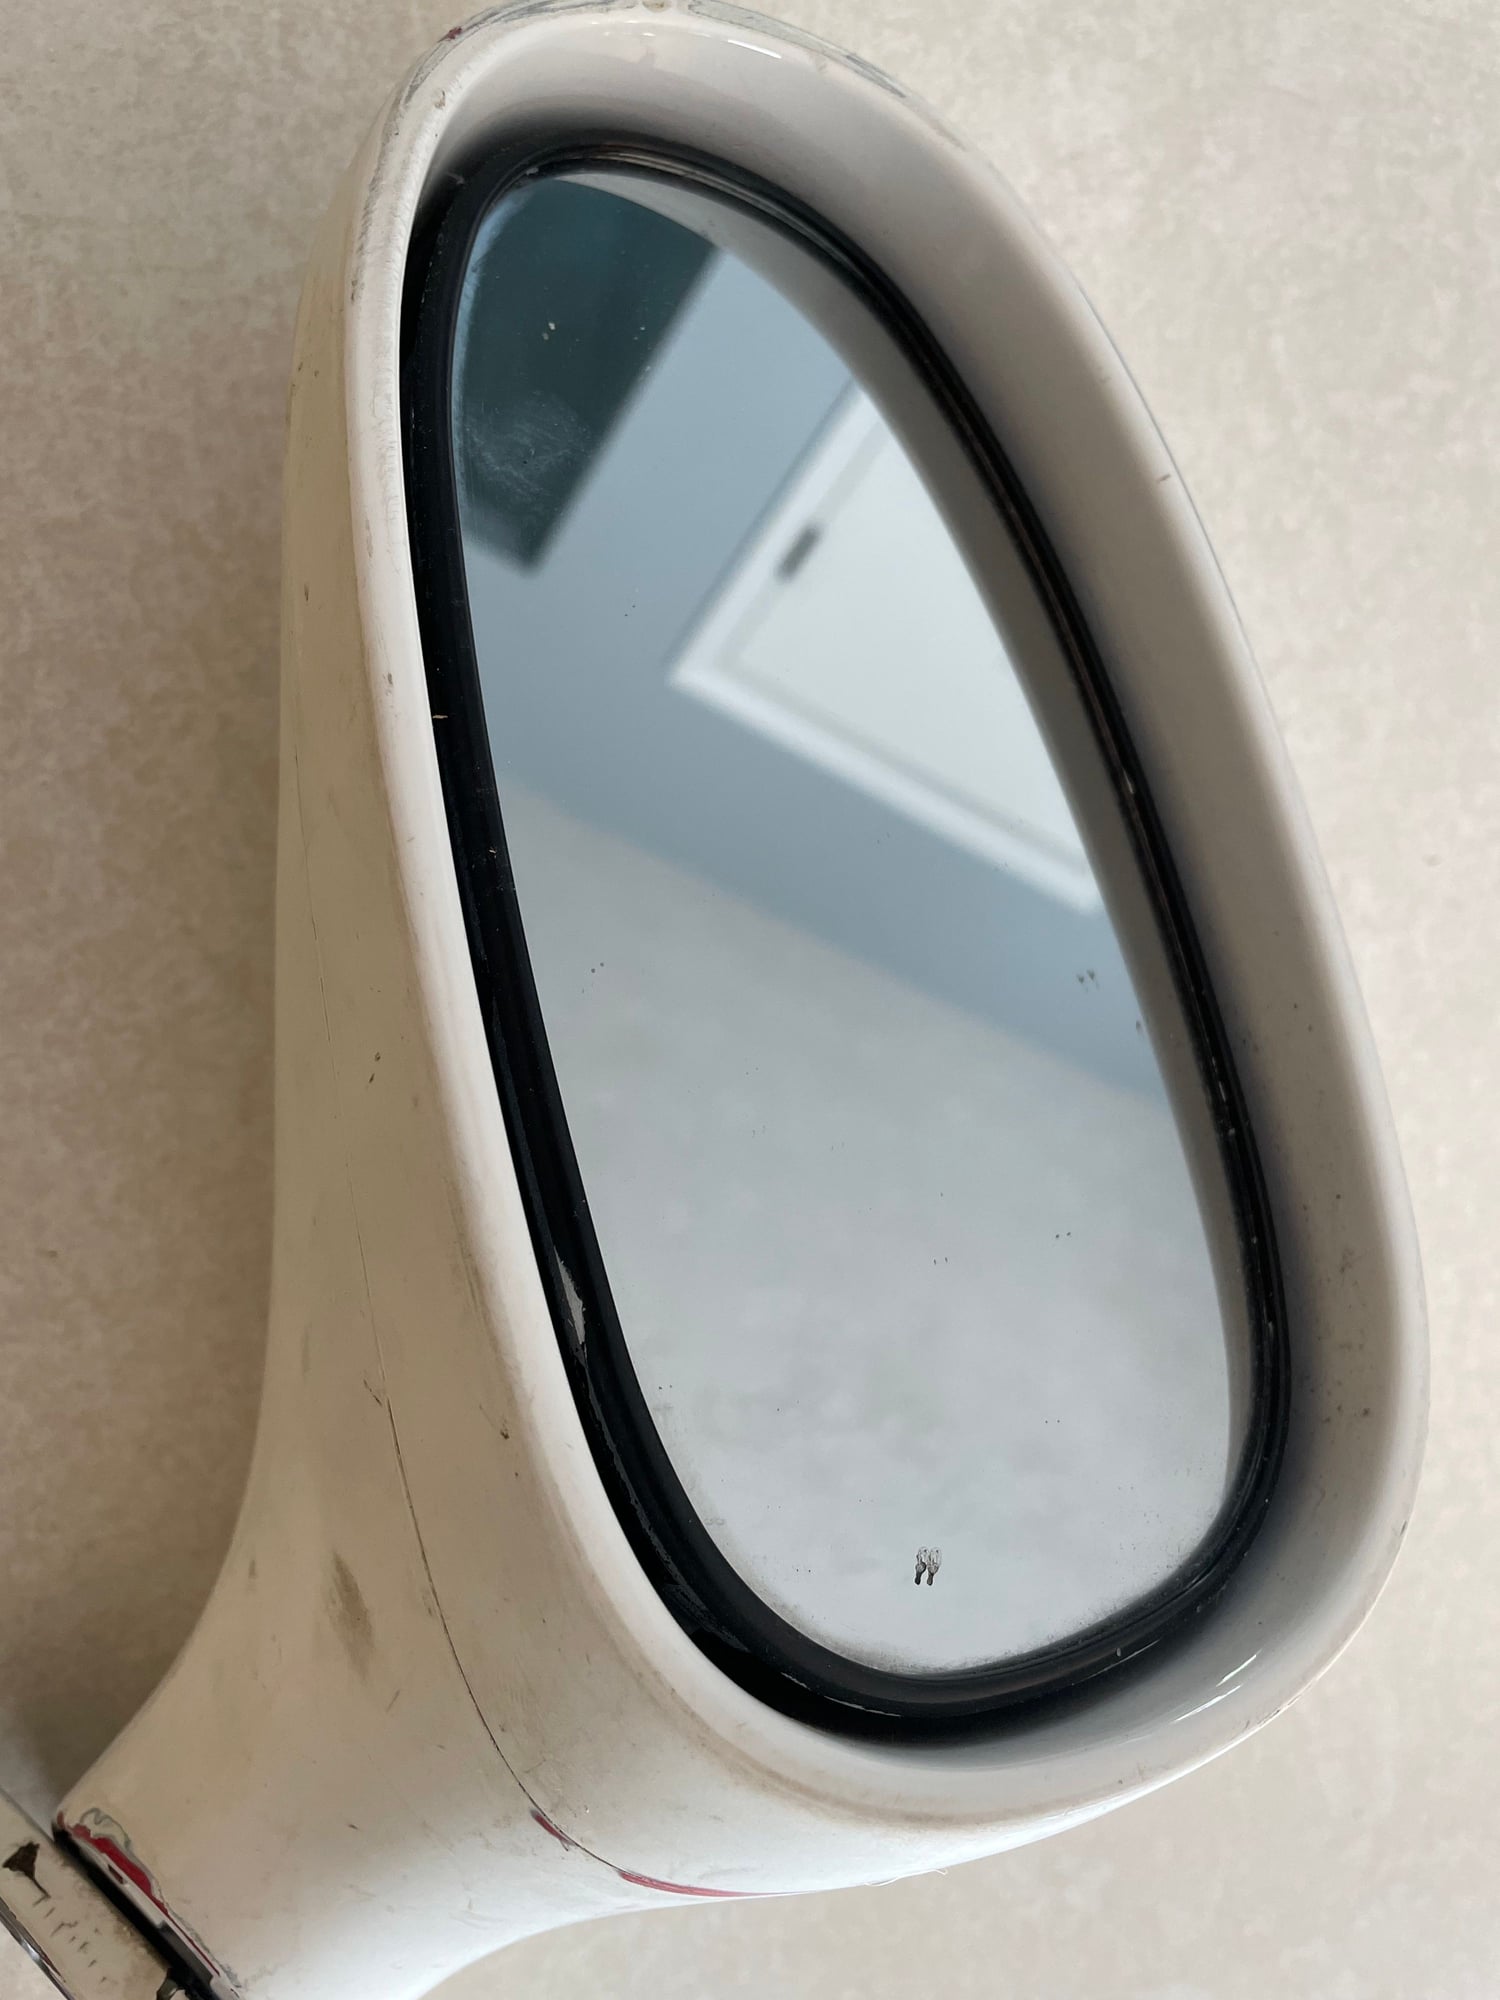 Exterior Body Parts - FD Rx7 USDM side mirrors - Used - 1993 to 2002 Mazda RX-7 - North Canton, OH 44720, United States